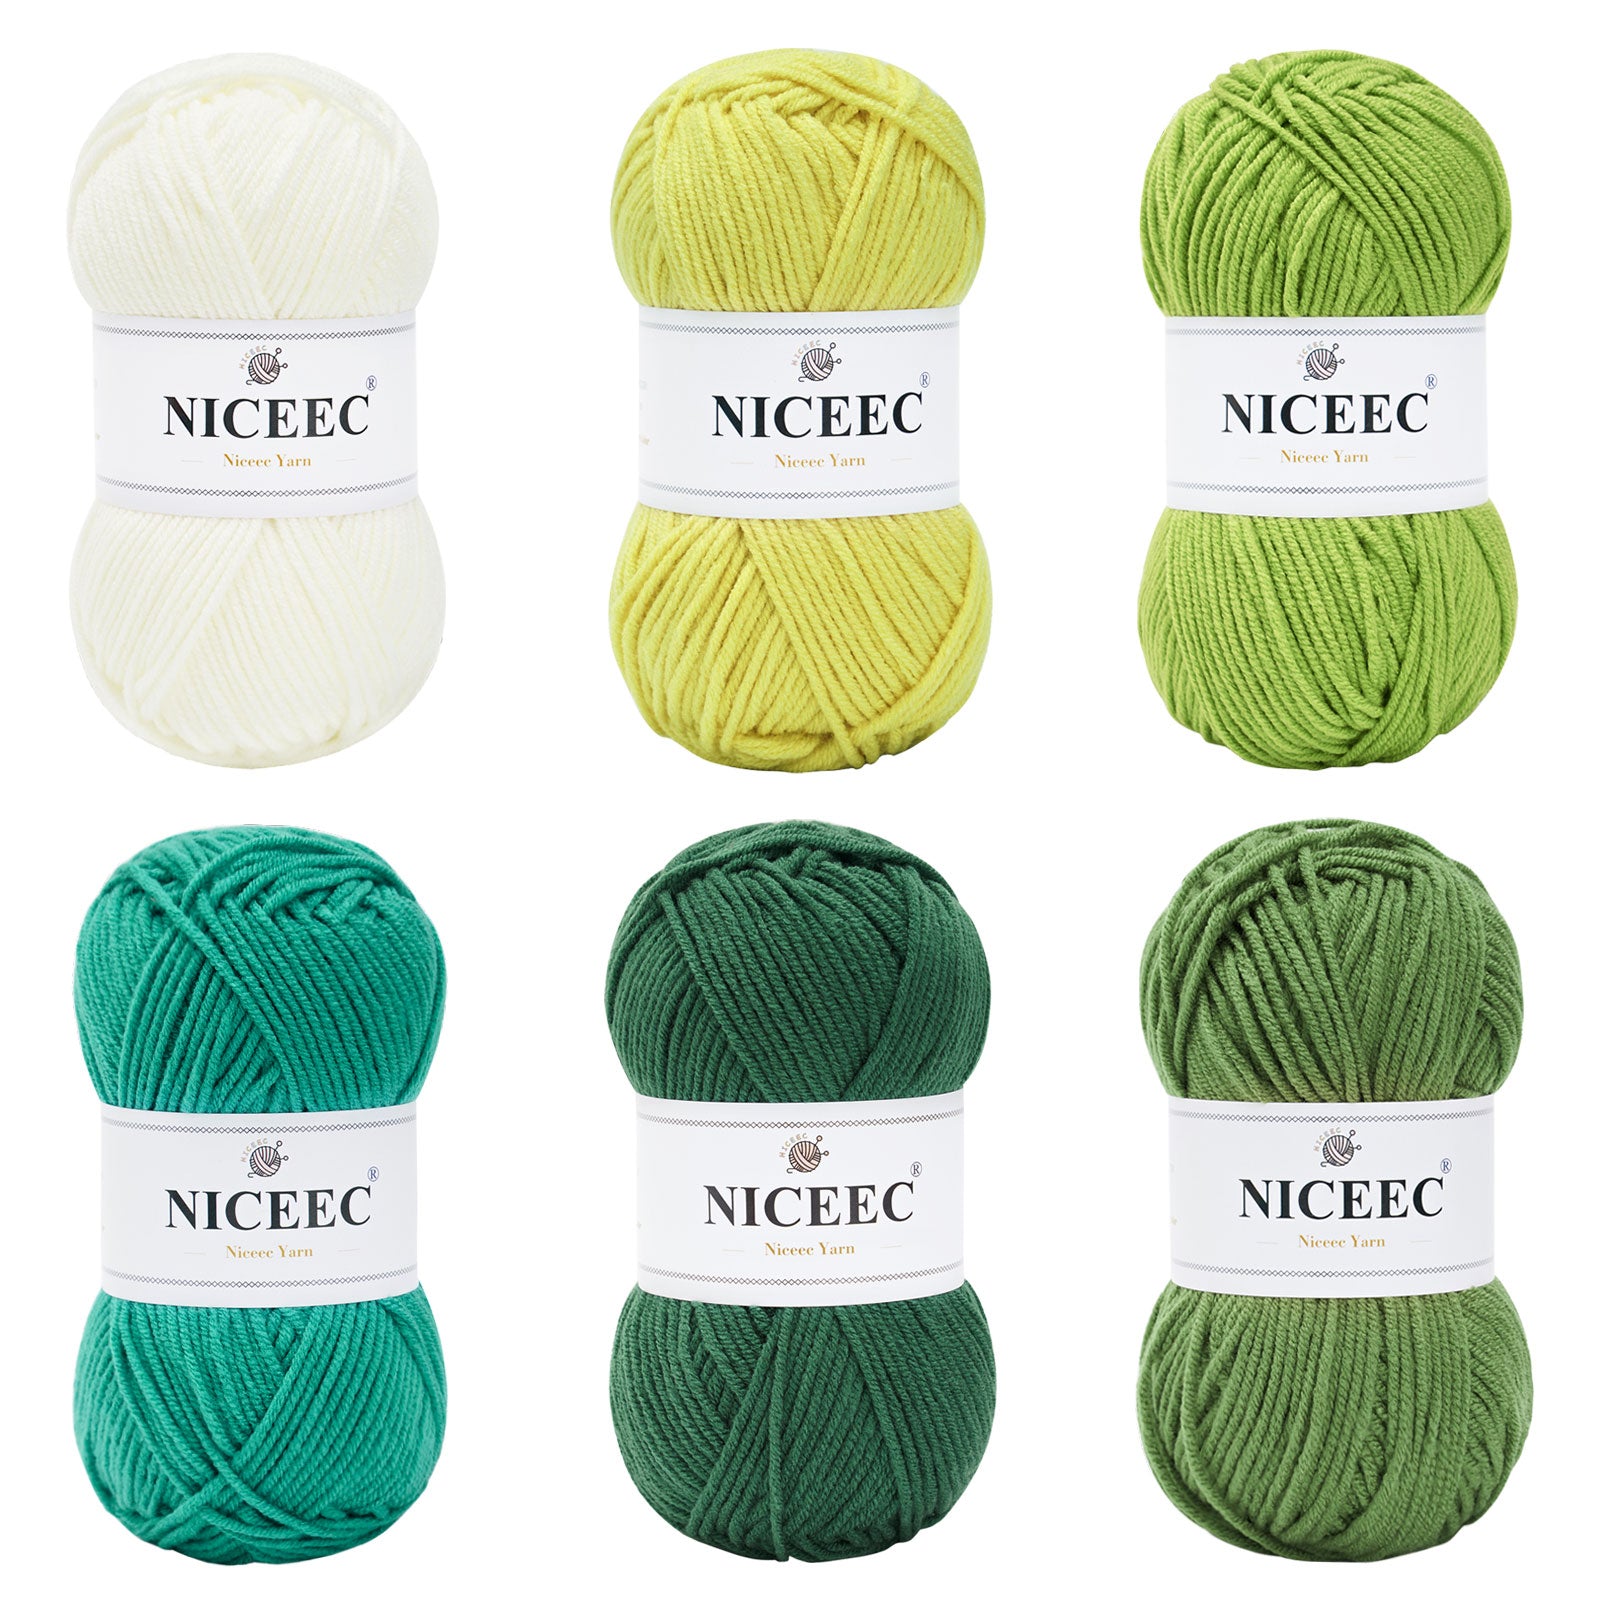 NICEEC 6×50g Soft Assorted Colors Yarn Sport Weight Yarn Bonbons Yarn for Crochet Knit 4 Ply Acrylic Yarn for DIY Project Starter Crochet Kit for Kids or Adults(6×145yds)